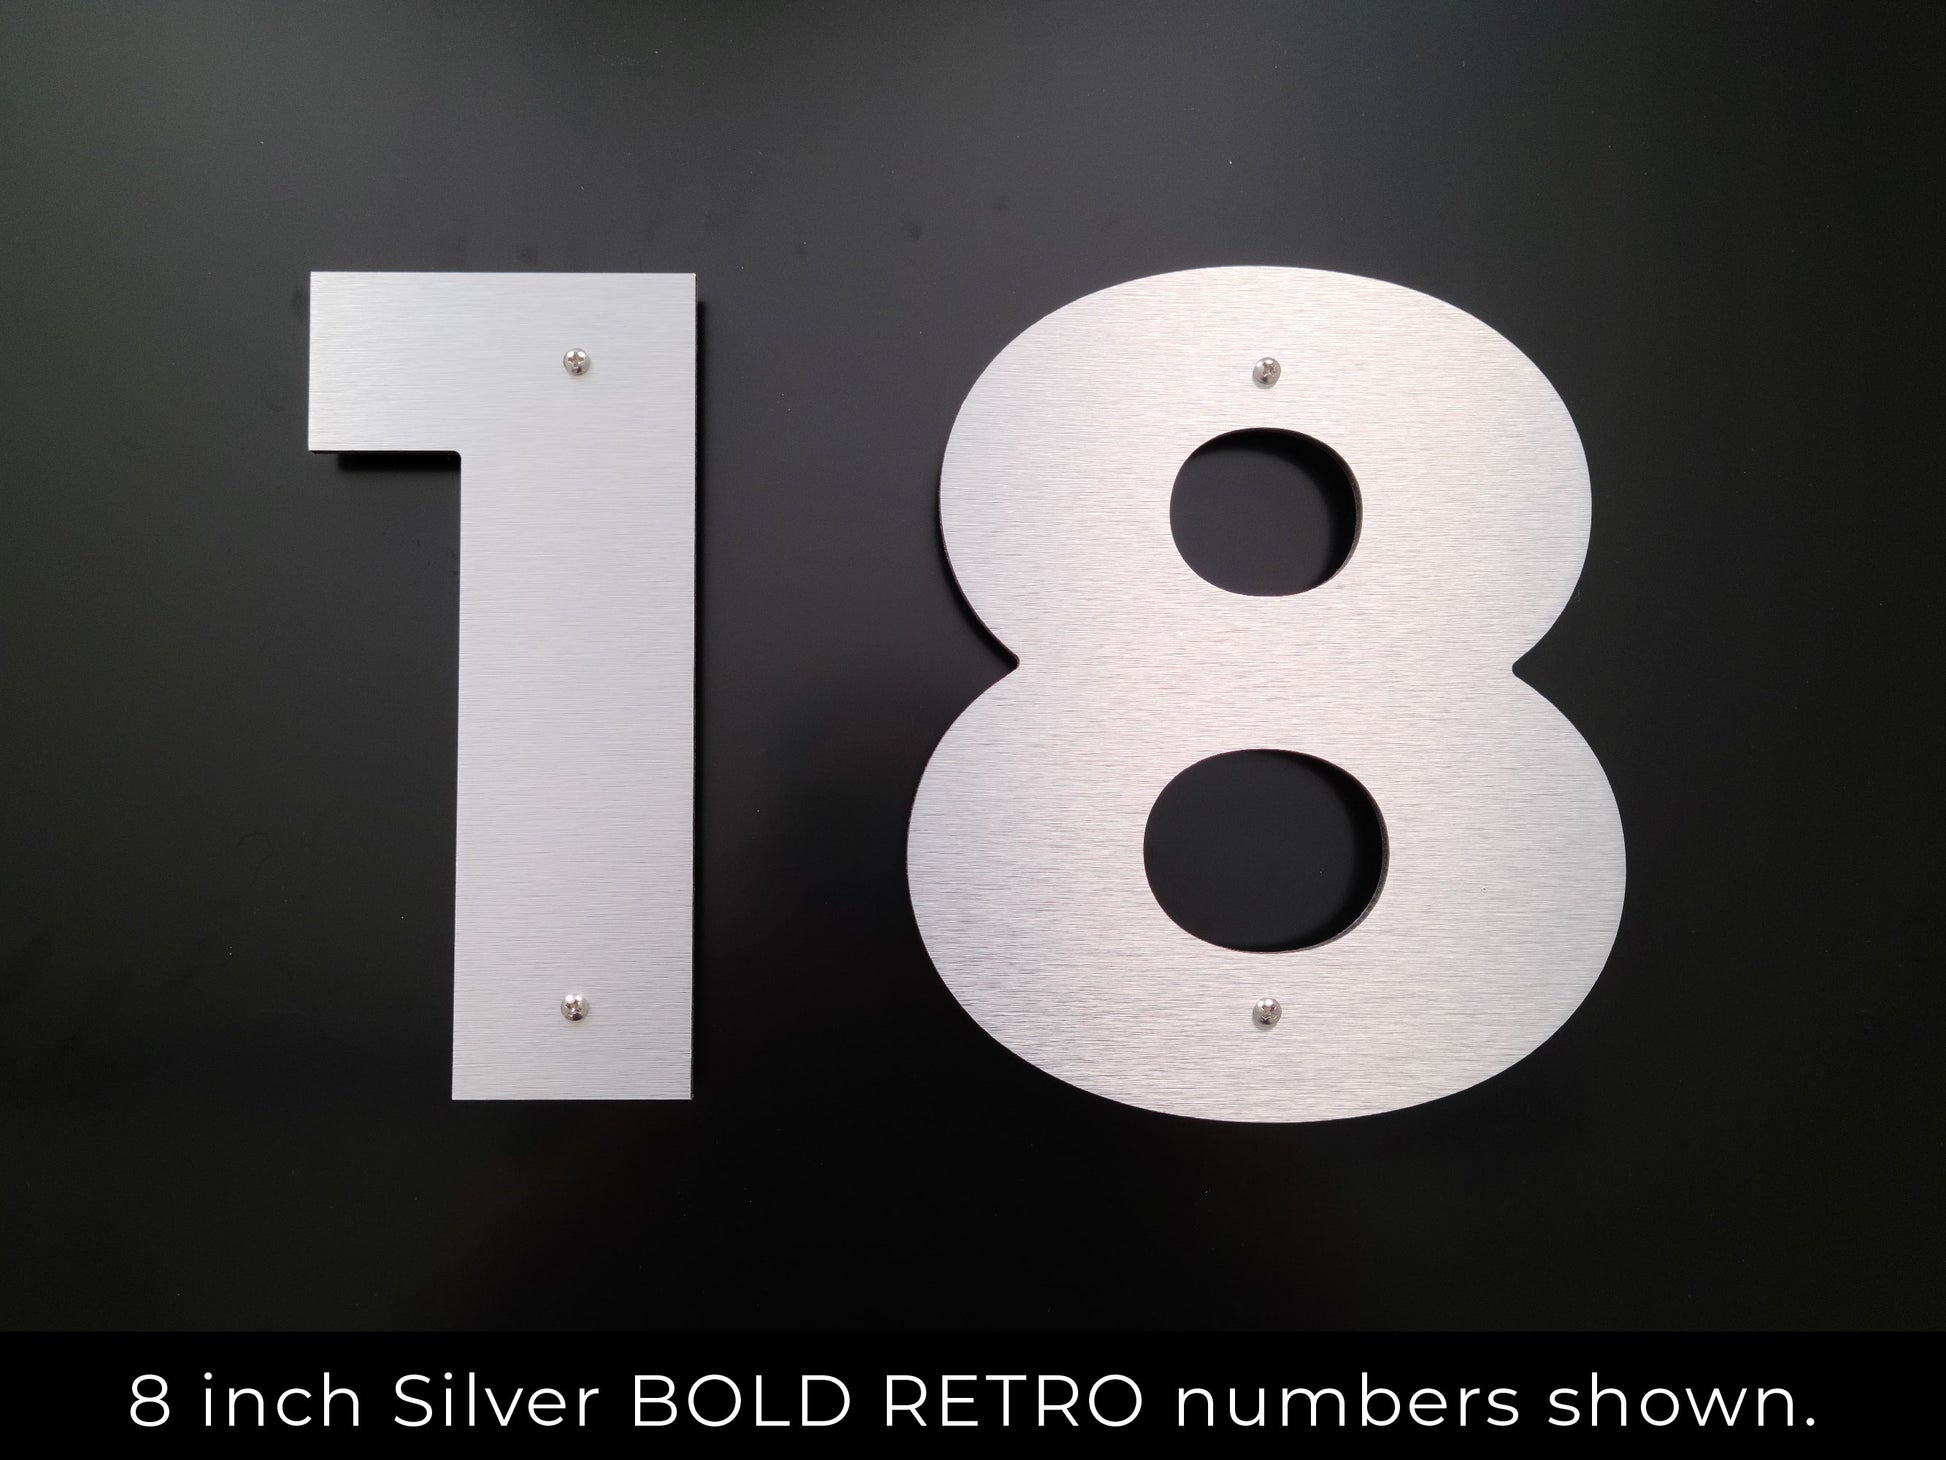 BOLD RETRO brushed silver numbers